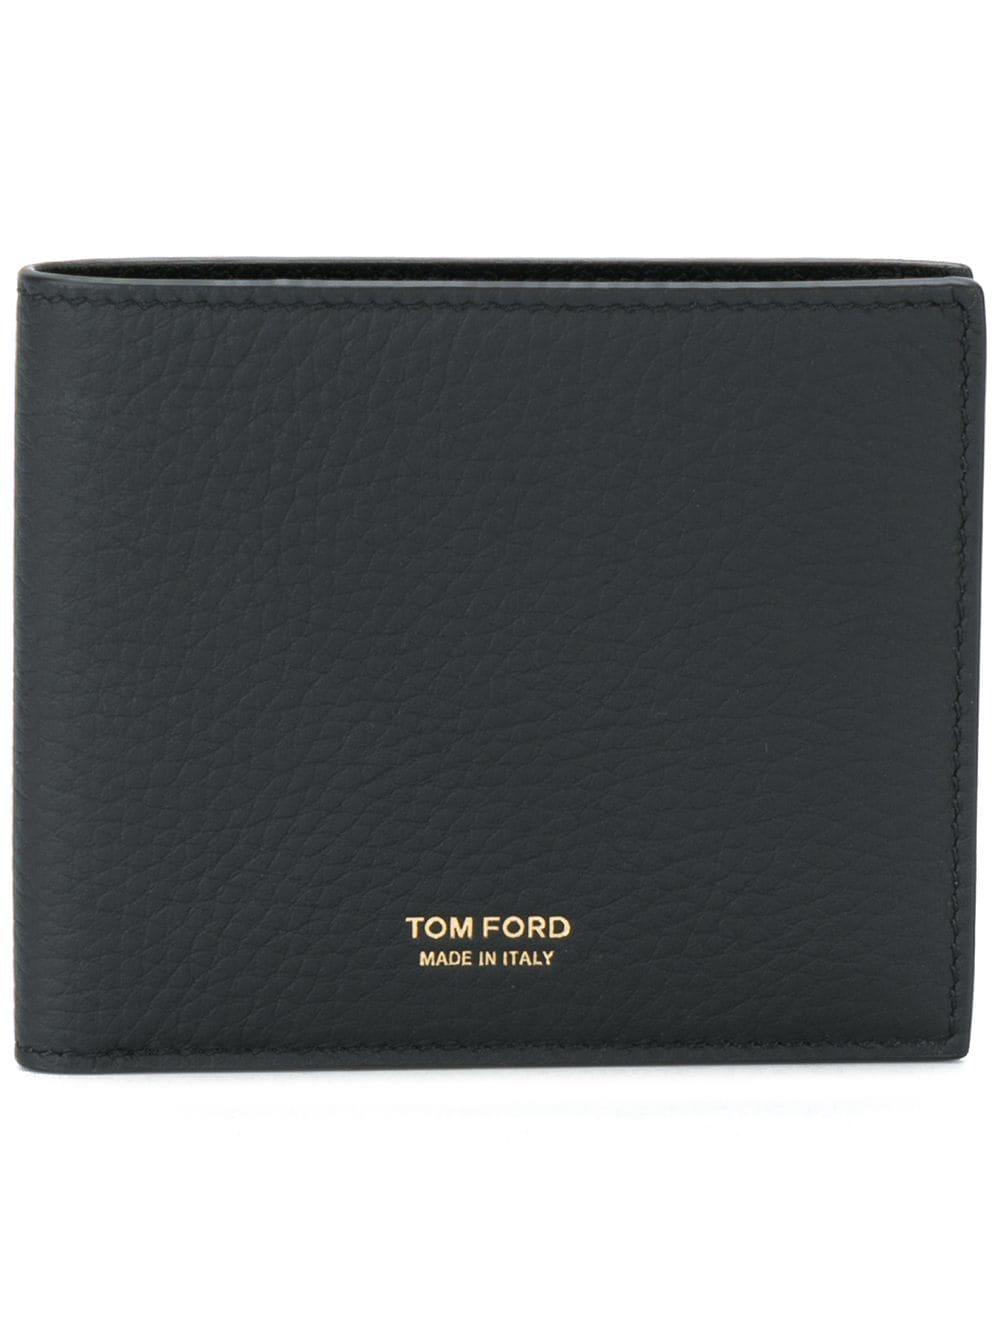 Tom Ford Leather T Bifold Wallet in Black for Men - Lyst